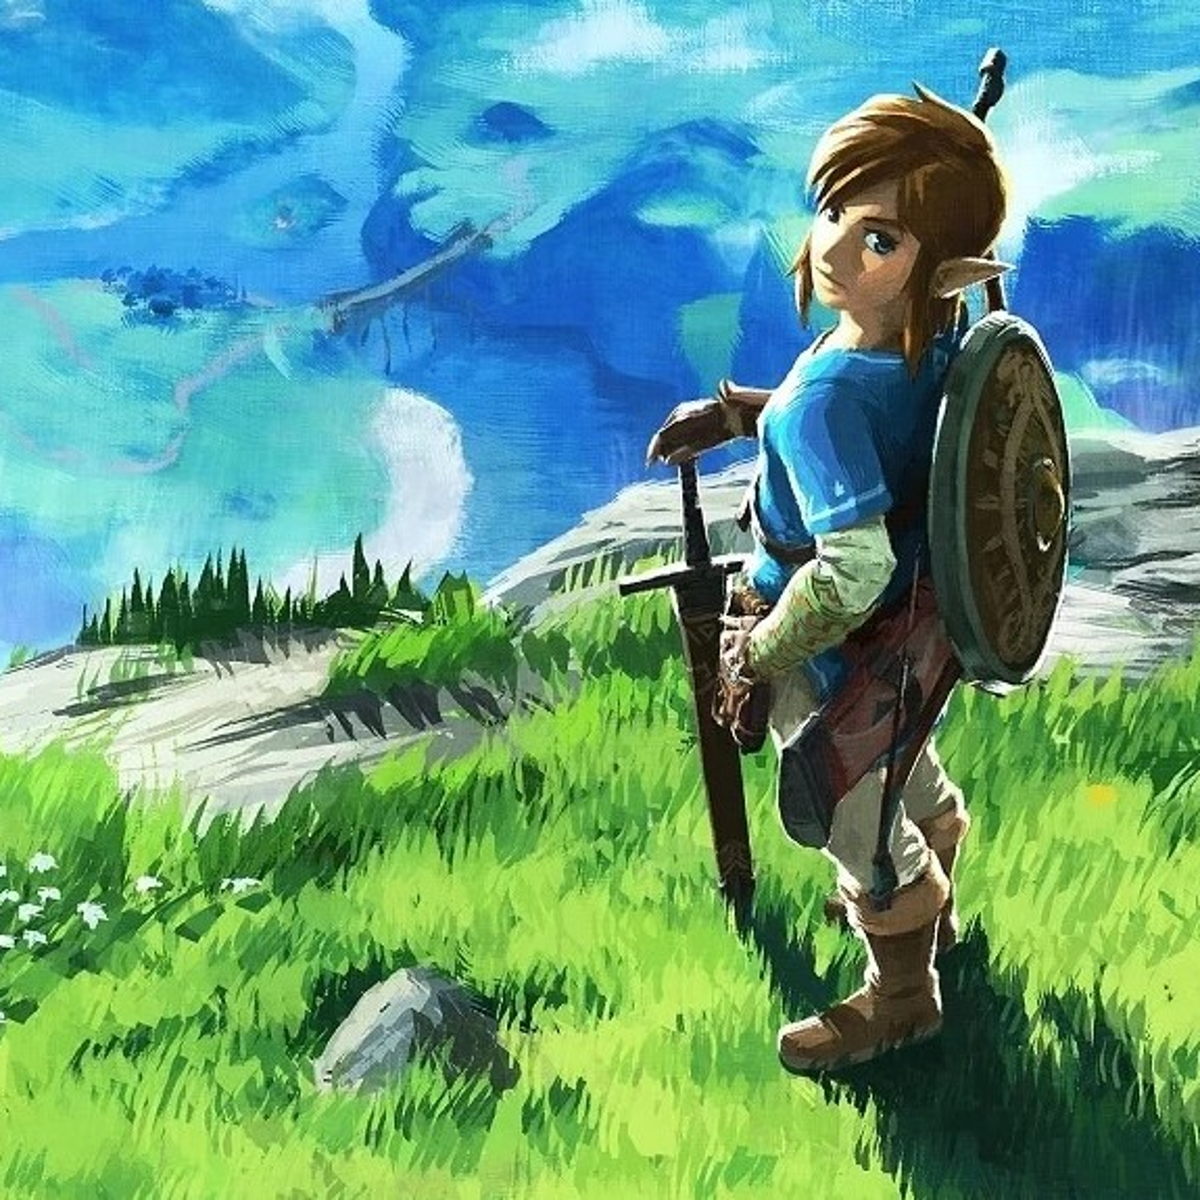 Can Tears of the Kingdom match the sly genius of Breath of the Wild's music? - Eurogamer.net (Picture 1)